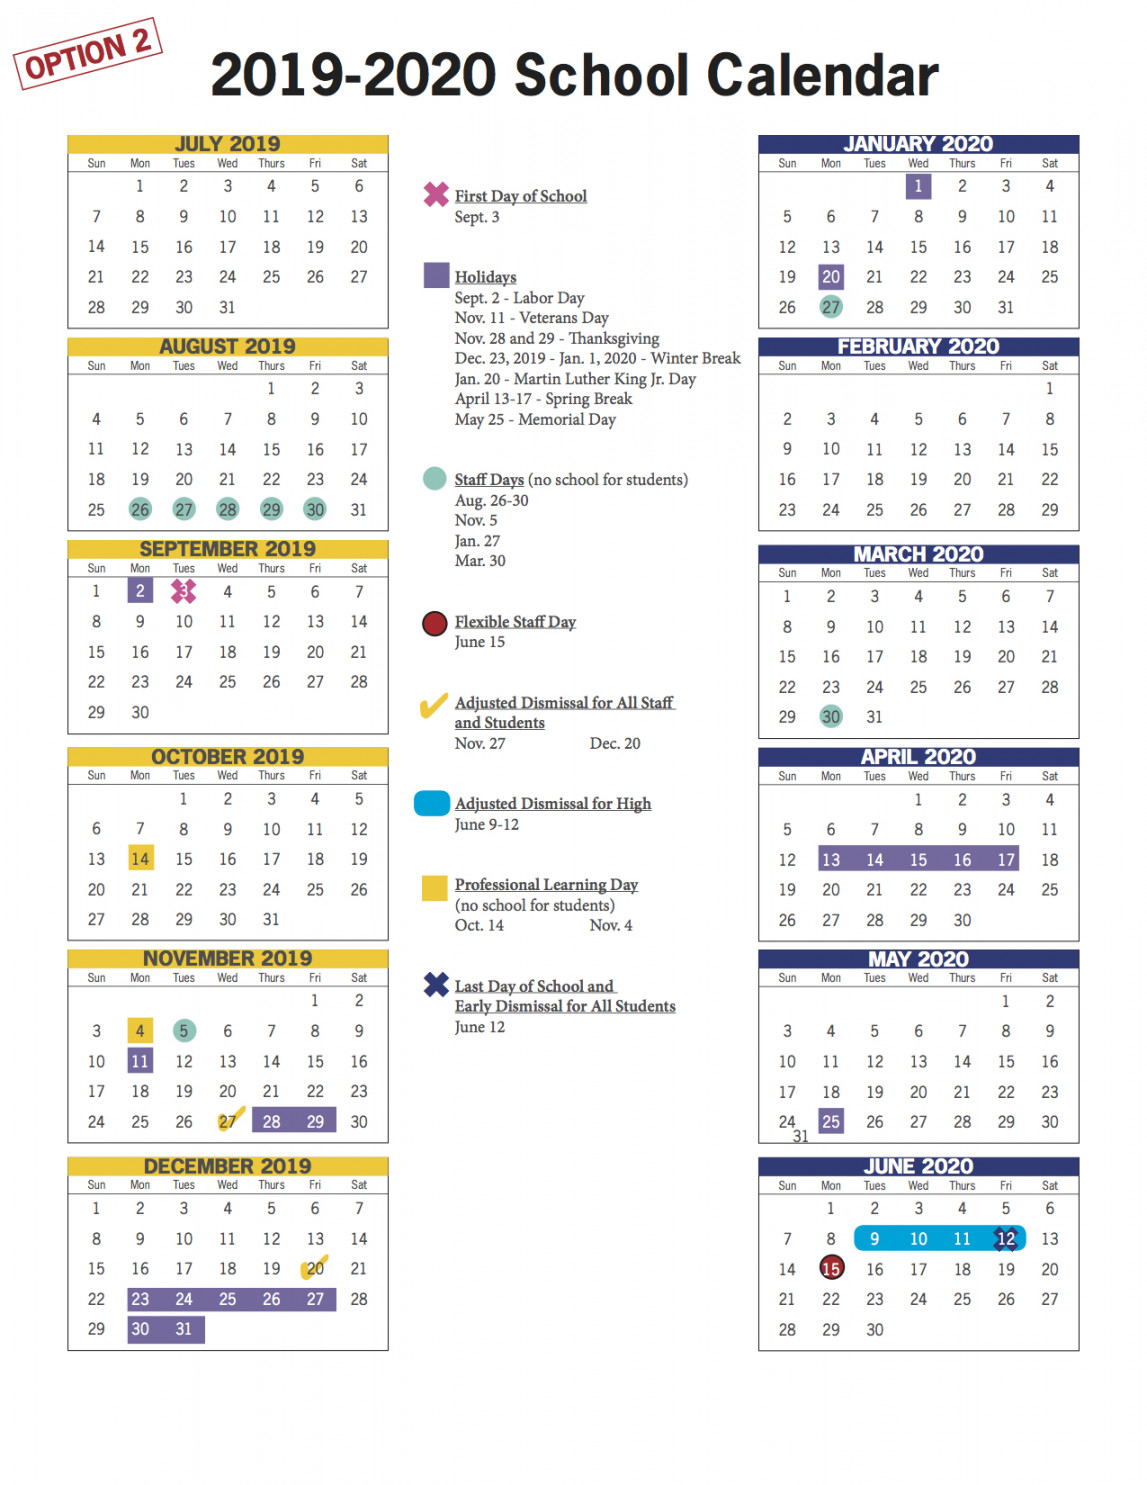 VBCPS E-Town Hall - - and - School Calendar Review